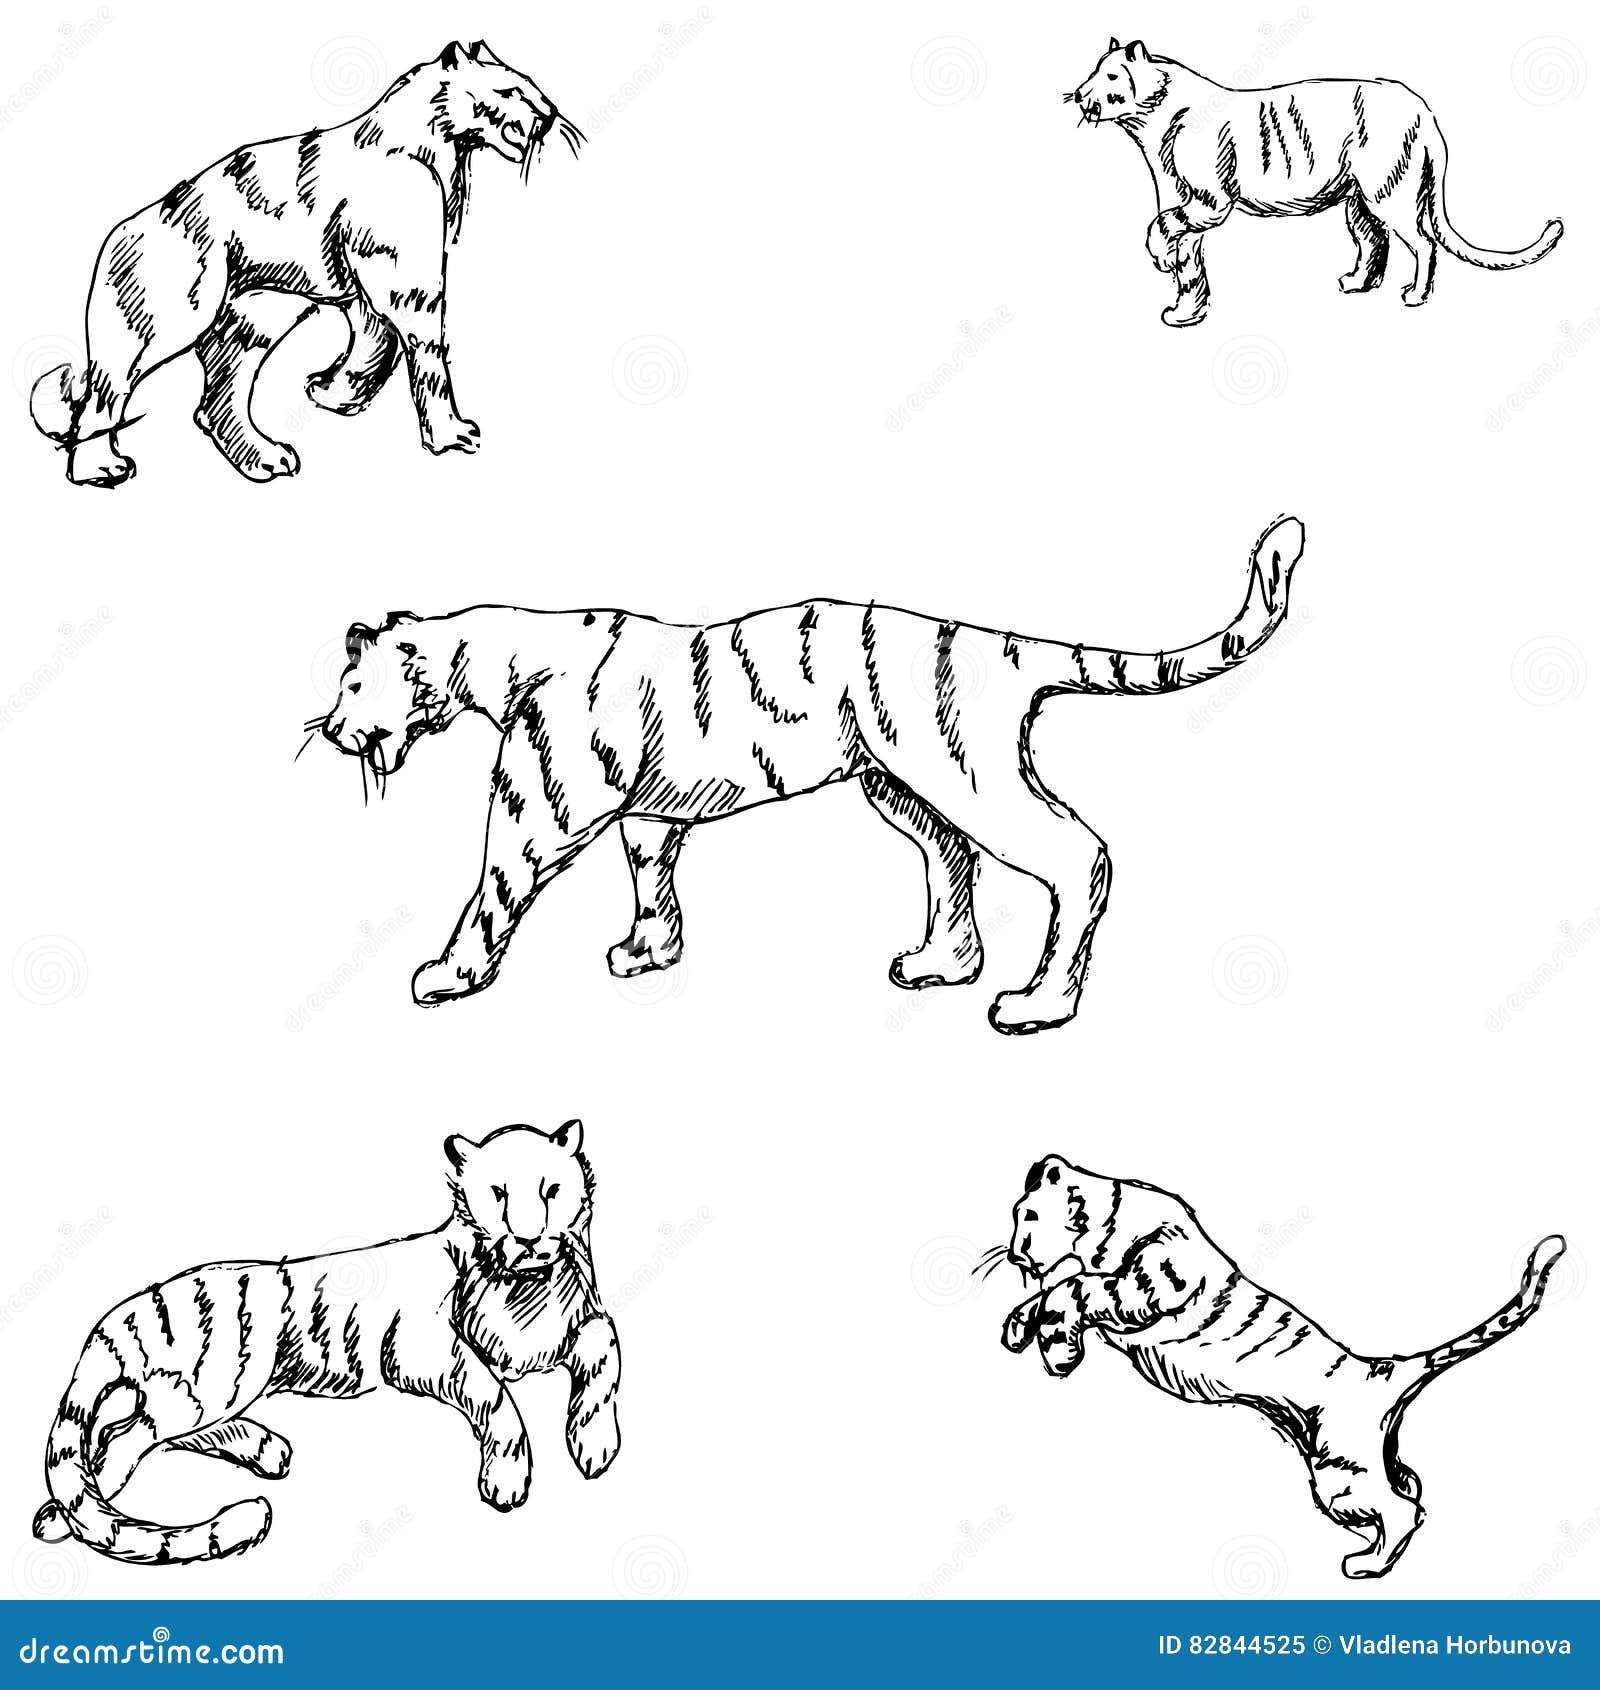 Tigers. a sketch by hand stock vector. Illustration of drawn - 82844525